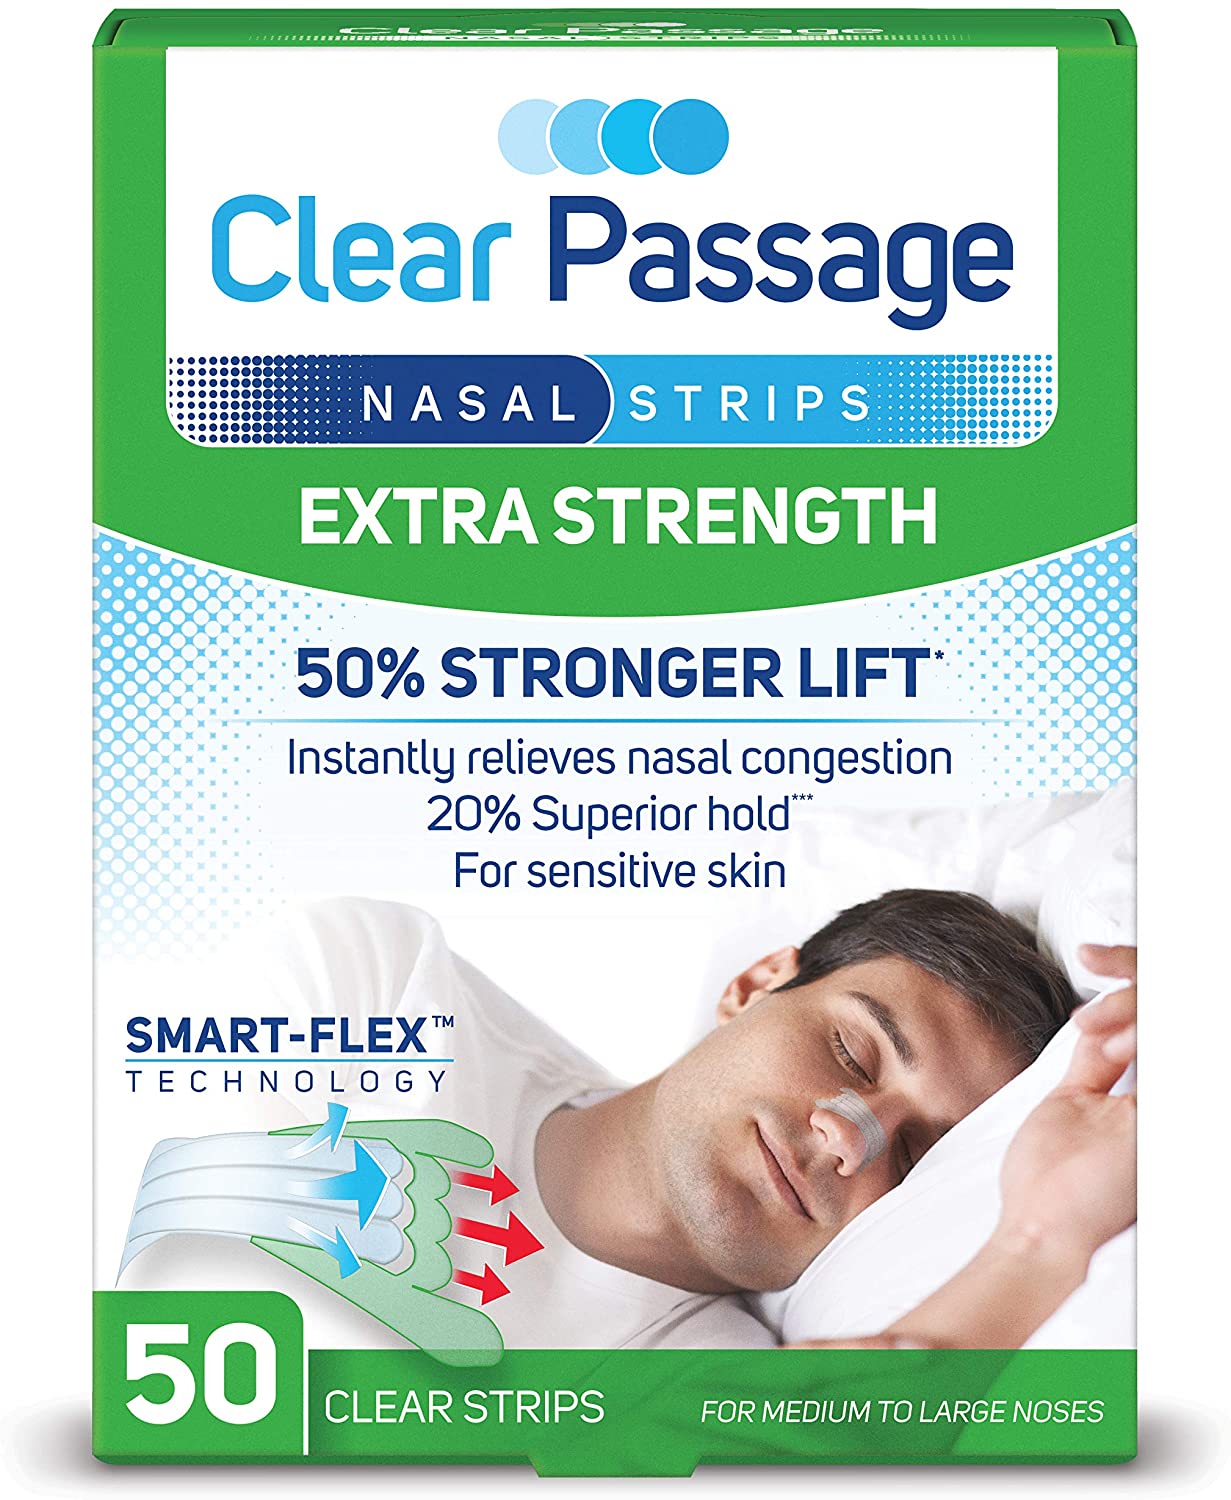 Clear Passage Nasal Strips for Sensitive Skin